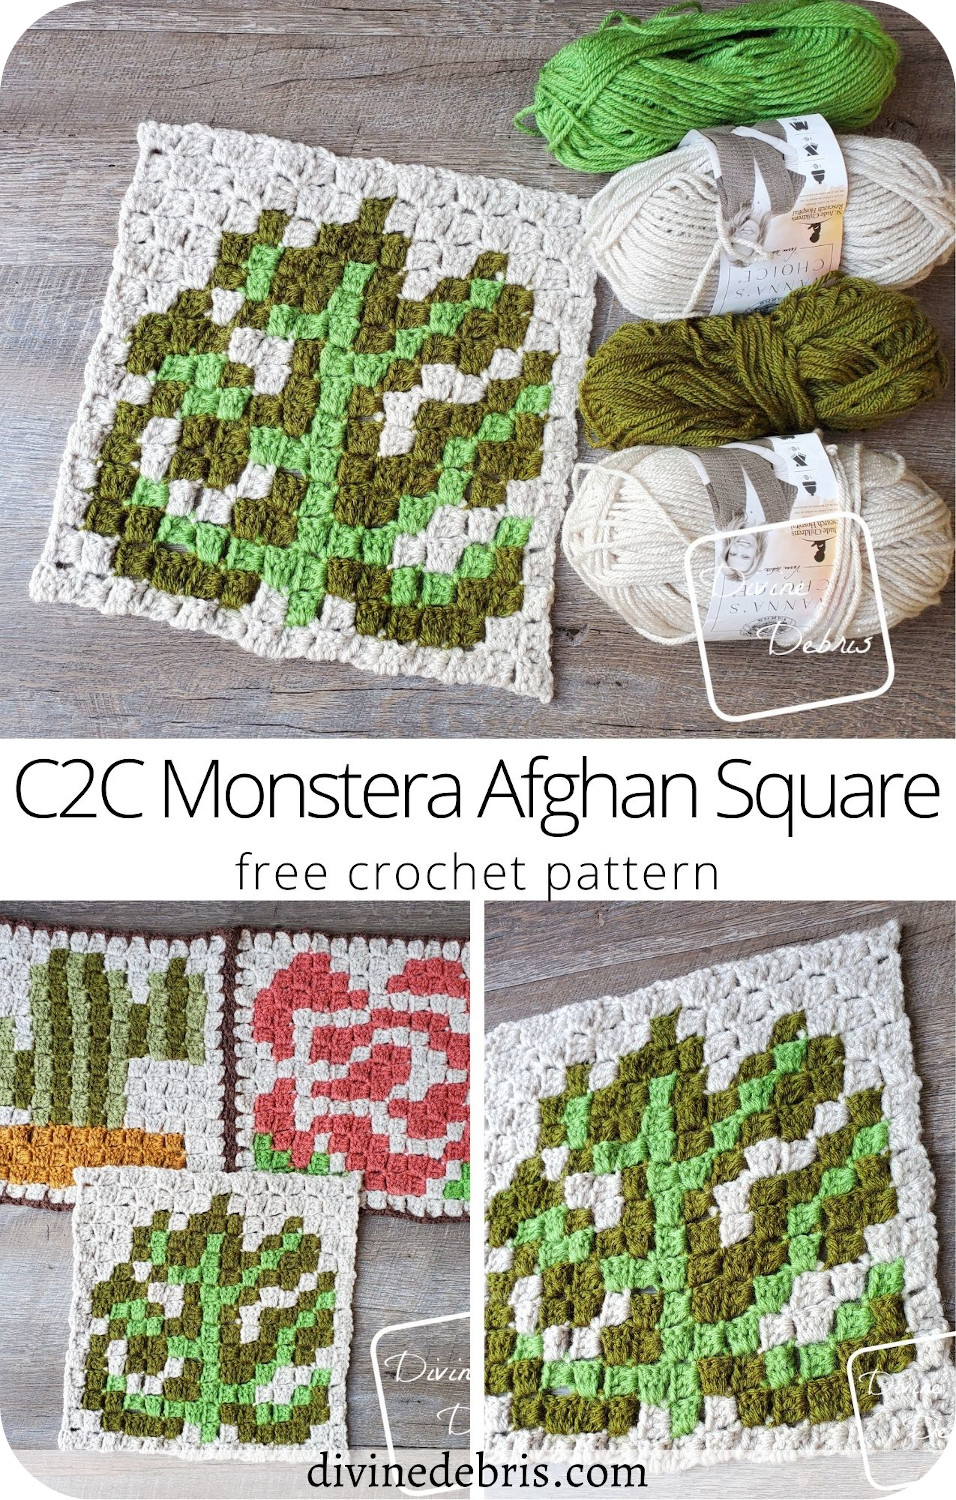 Learn to make the C2C Monstera Afghan Square free crochet pattern, the 3rd square in the year-long C2C CAL by DivineDebris.com